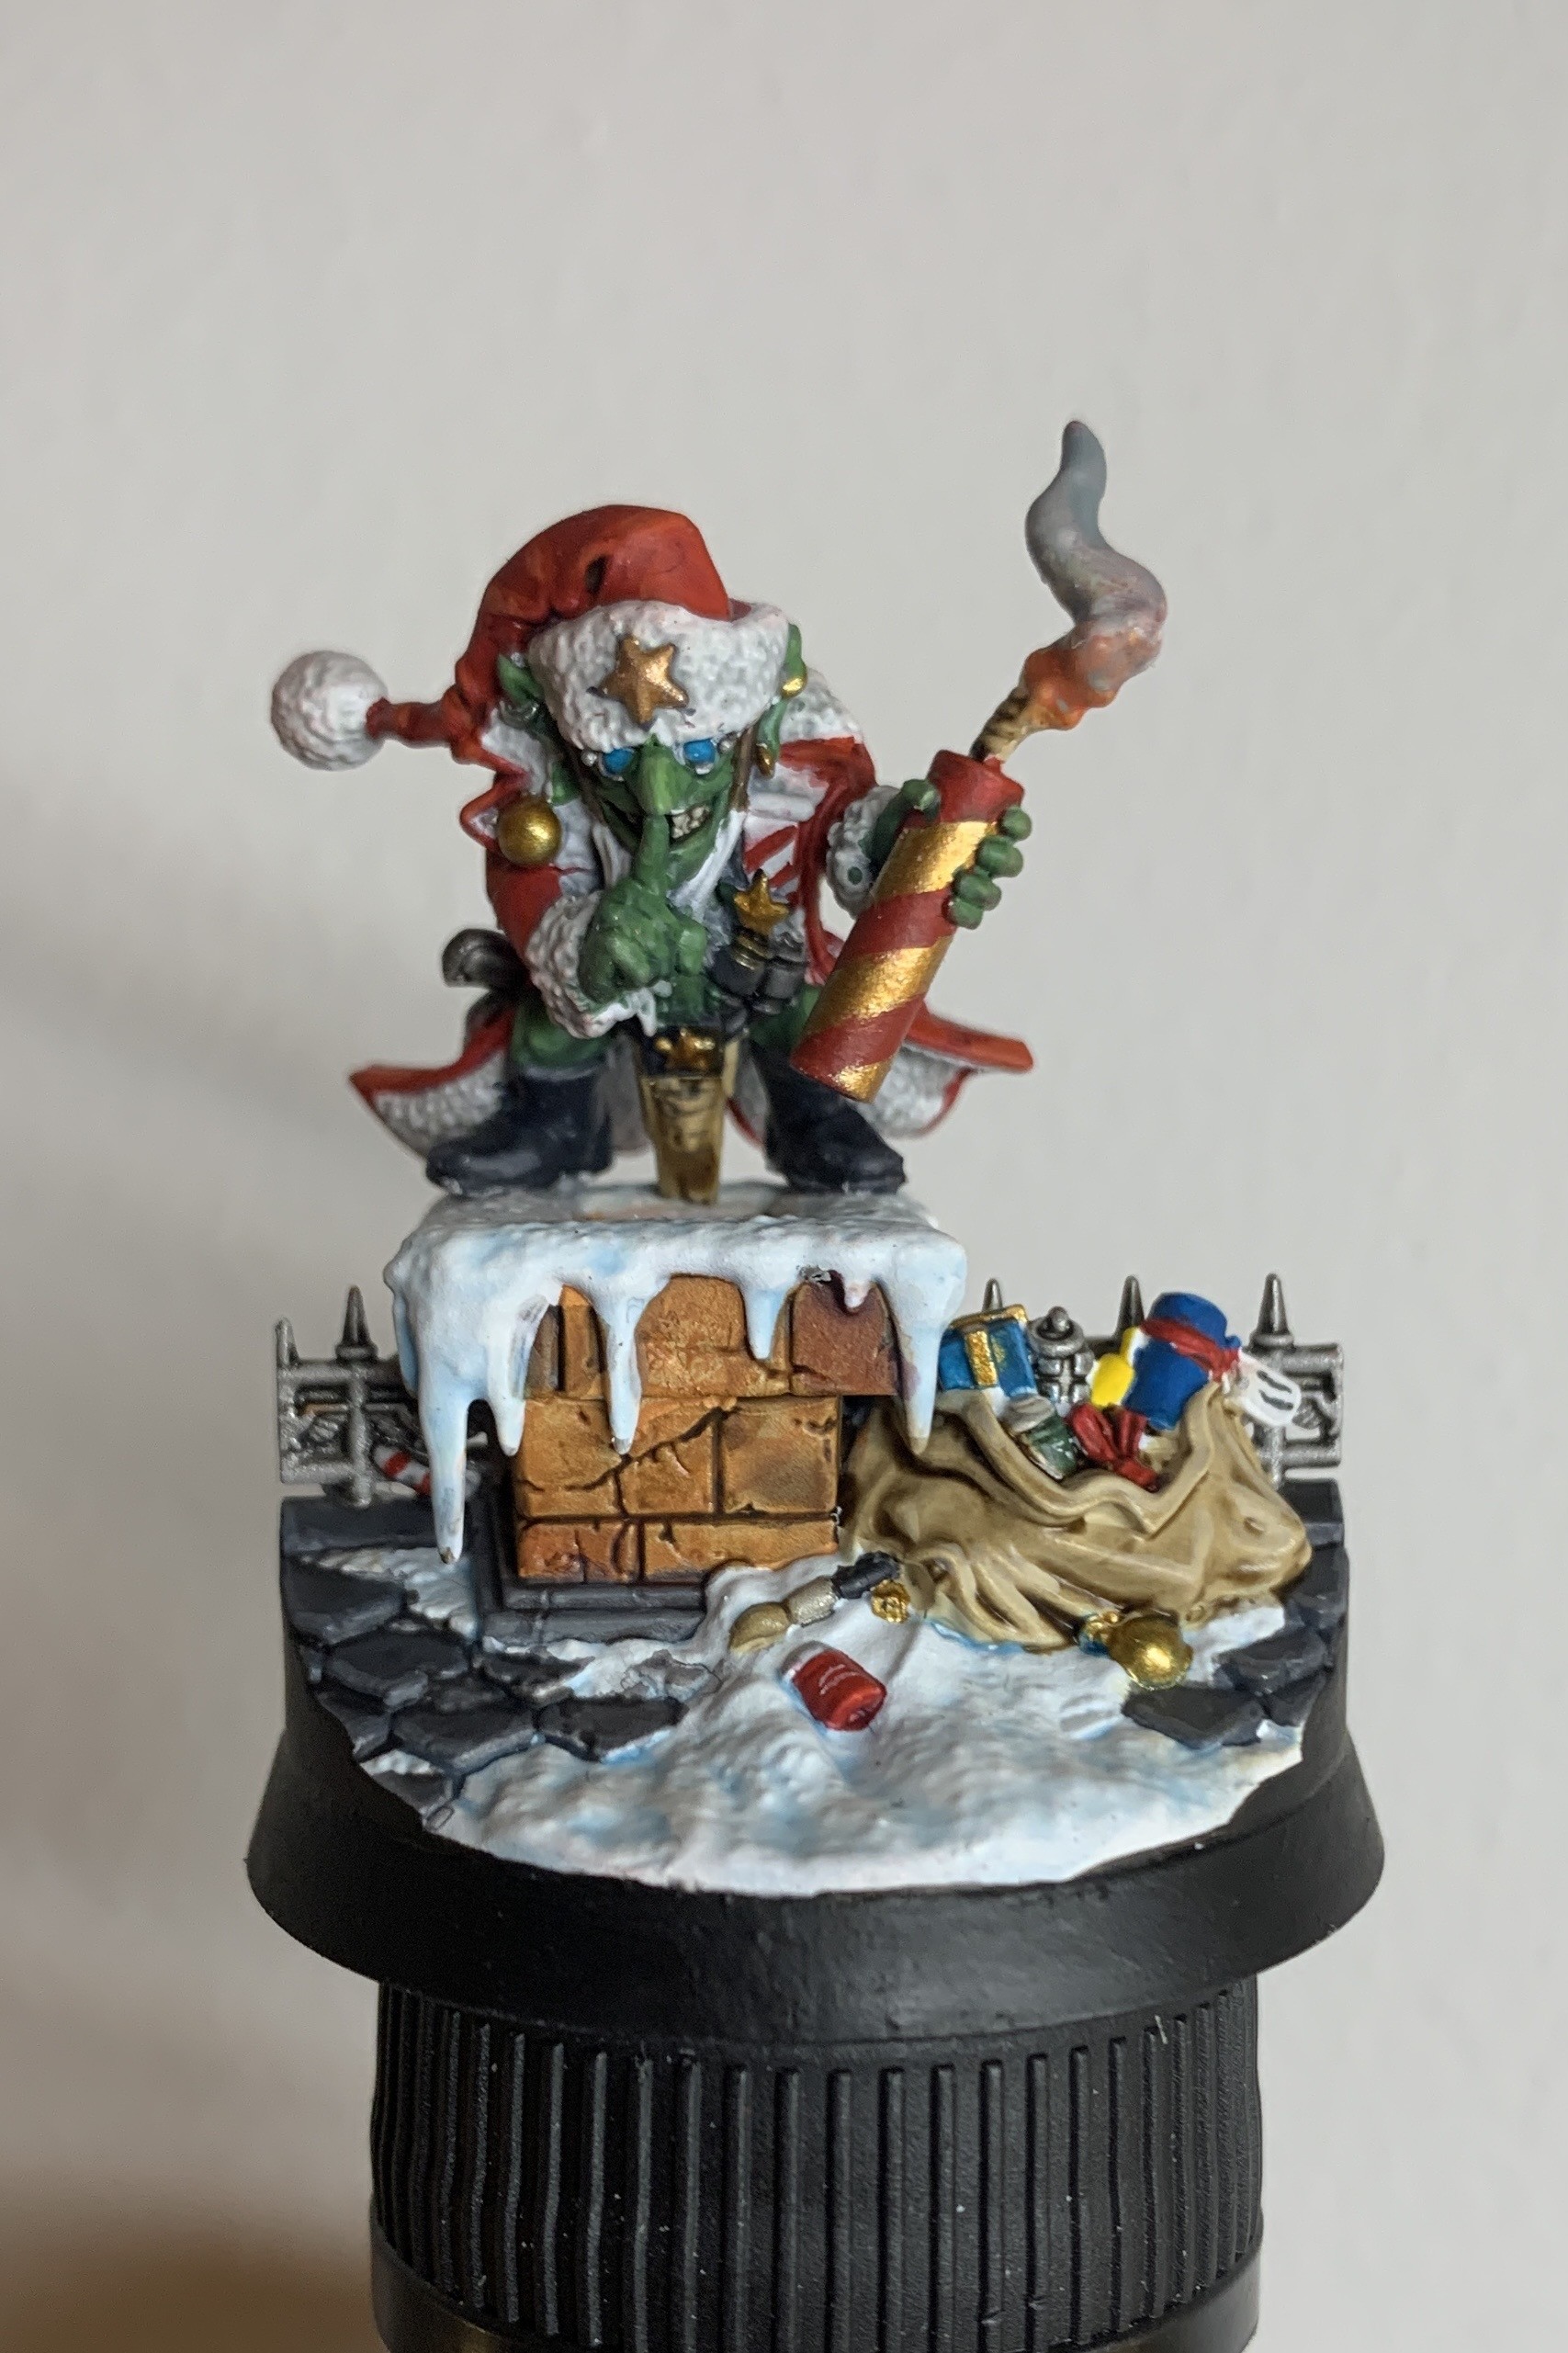 Small green Oak in a red Christmas outfit hiding a red and gold explosive. The Ork is stood over a chimney and is about to drop the explosive down it. Next to the chimney is roof tiling and a sack of presents